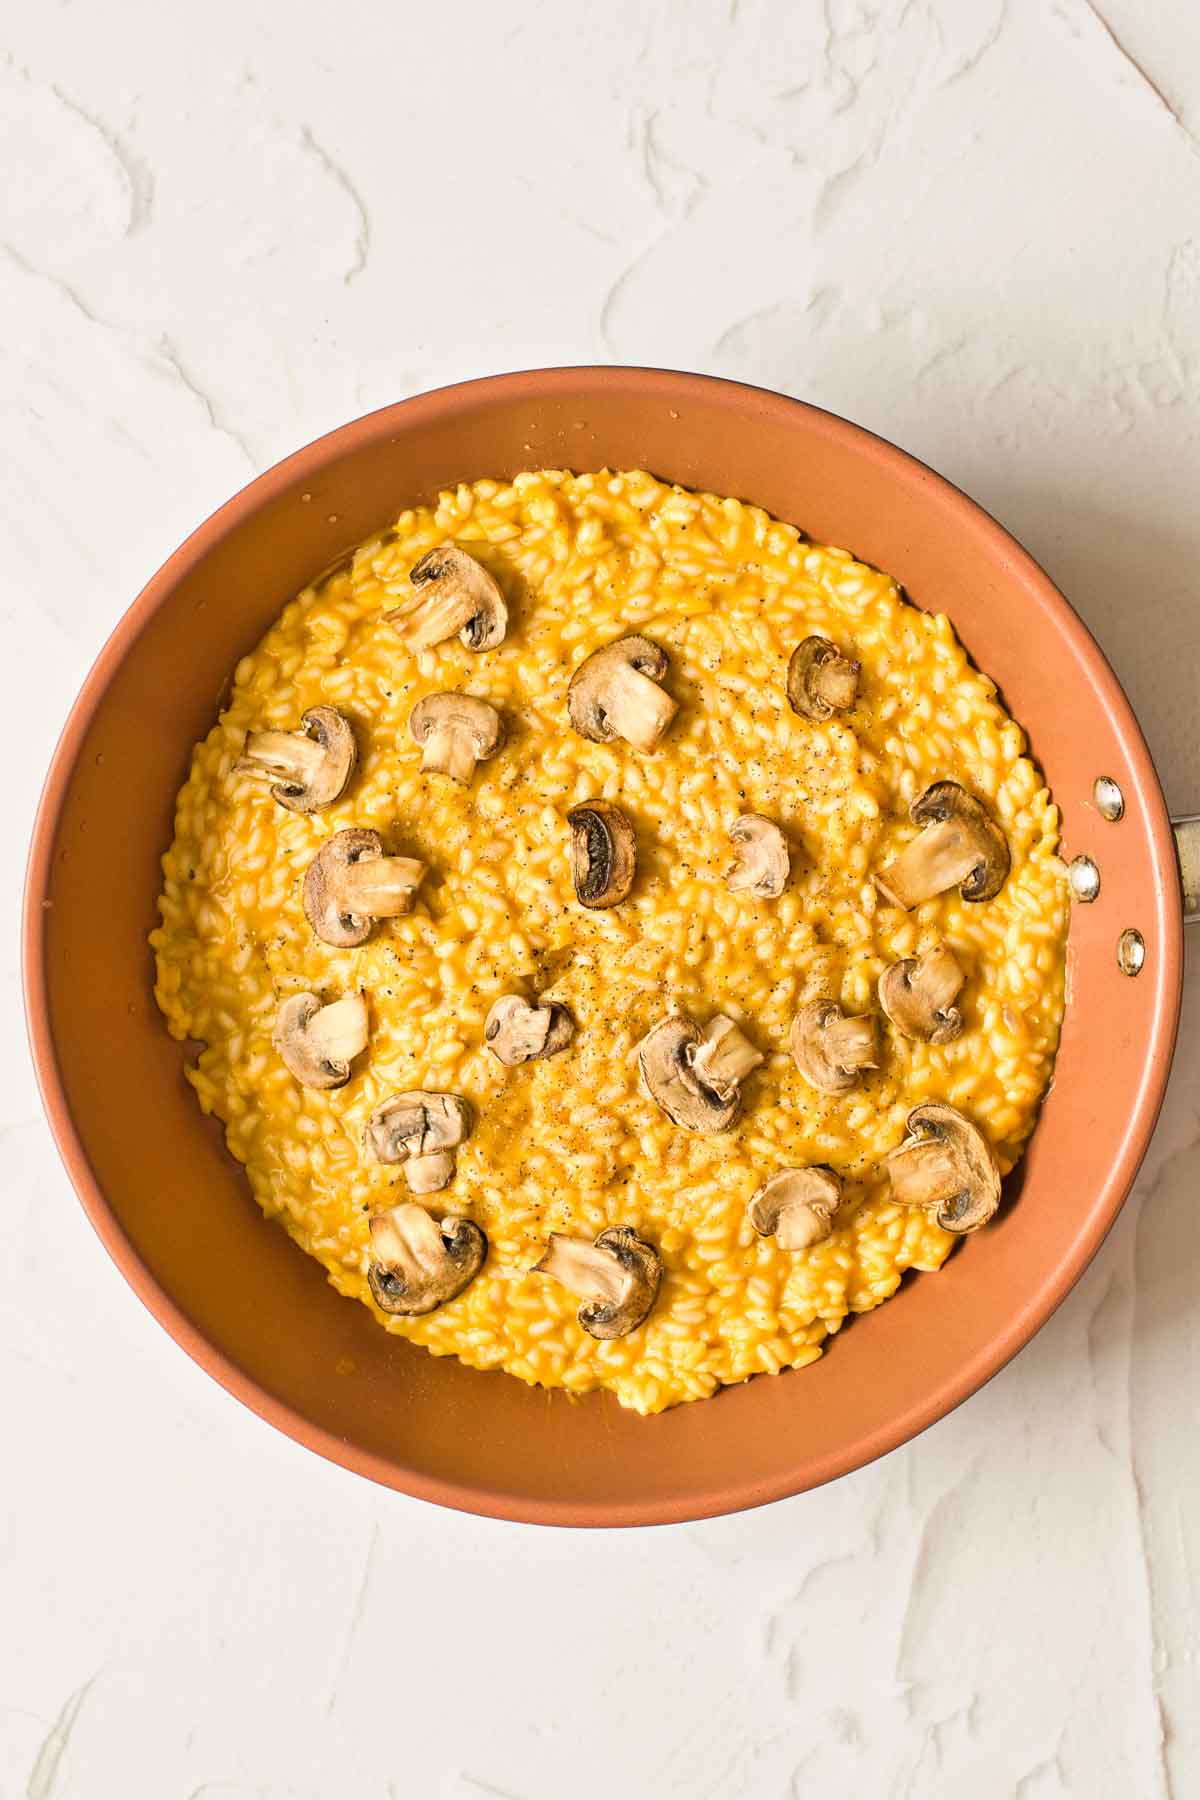 A big shallow bowl full of light-orange-colored pumpkin risotto. It is covered in sautéed mushrooms.